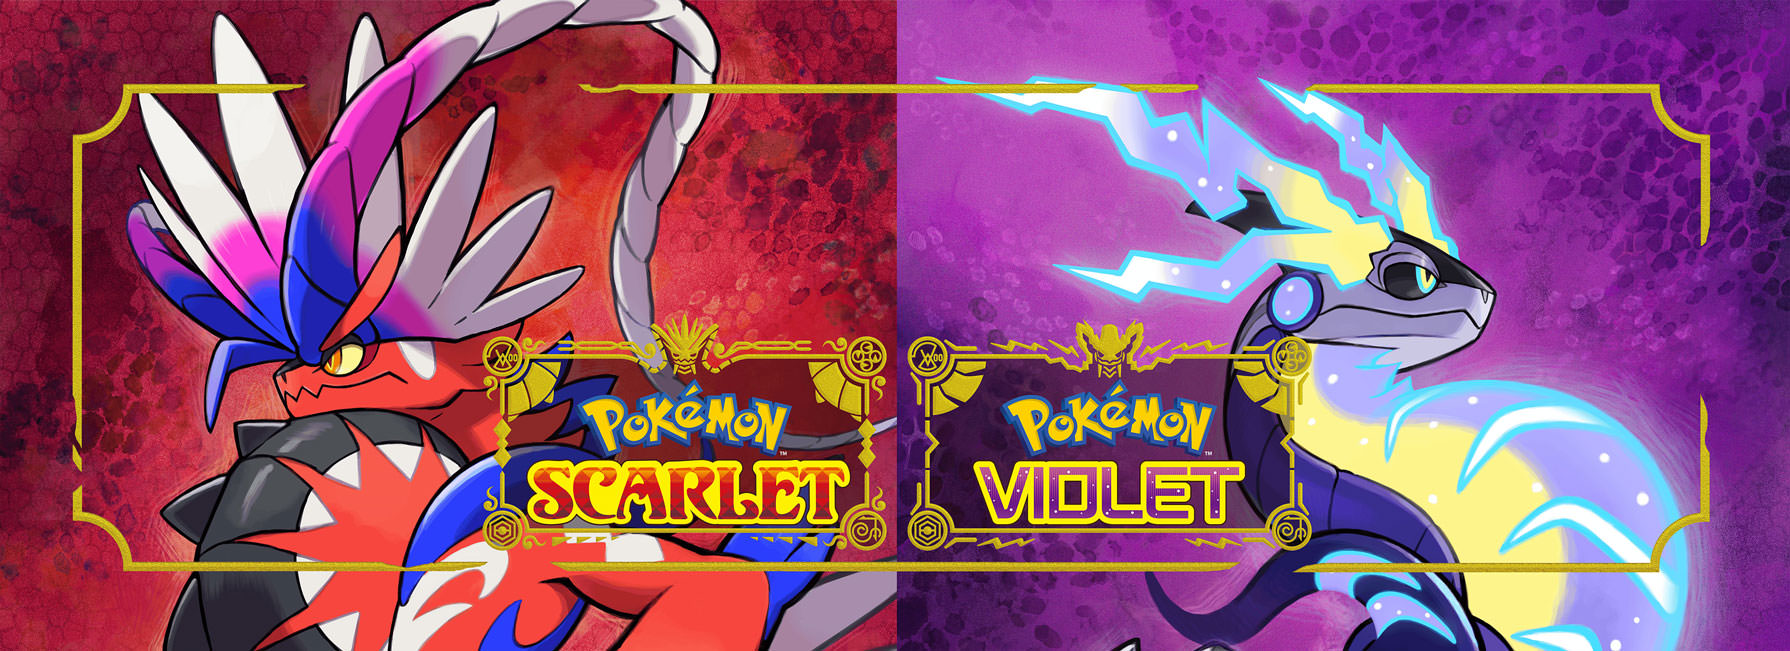 Pokemon Scarlet and Violet - All New Leaks So Far - HIGH ON CINEMA